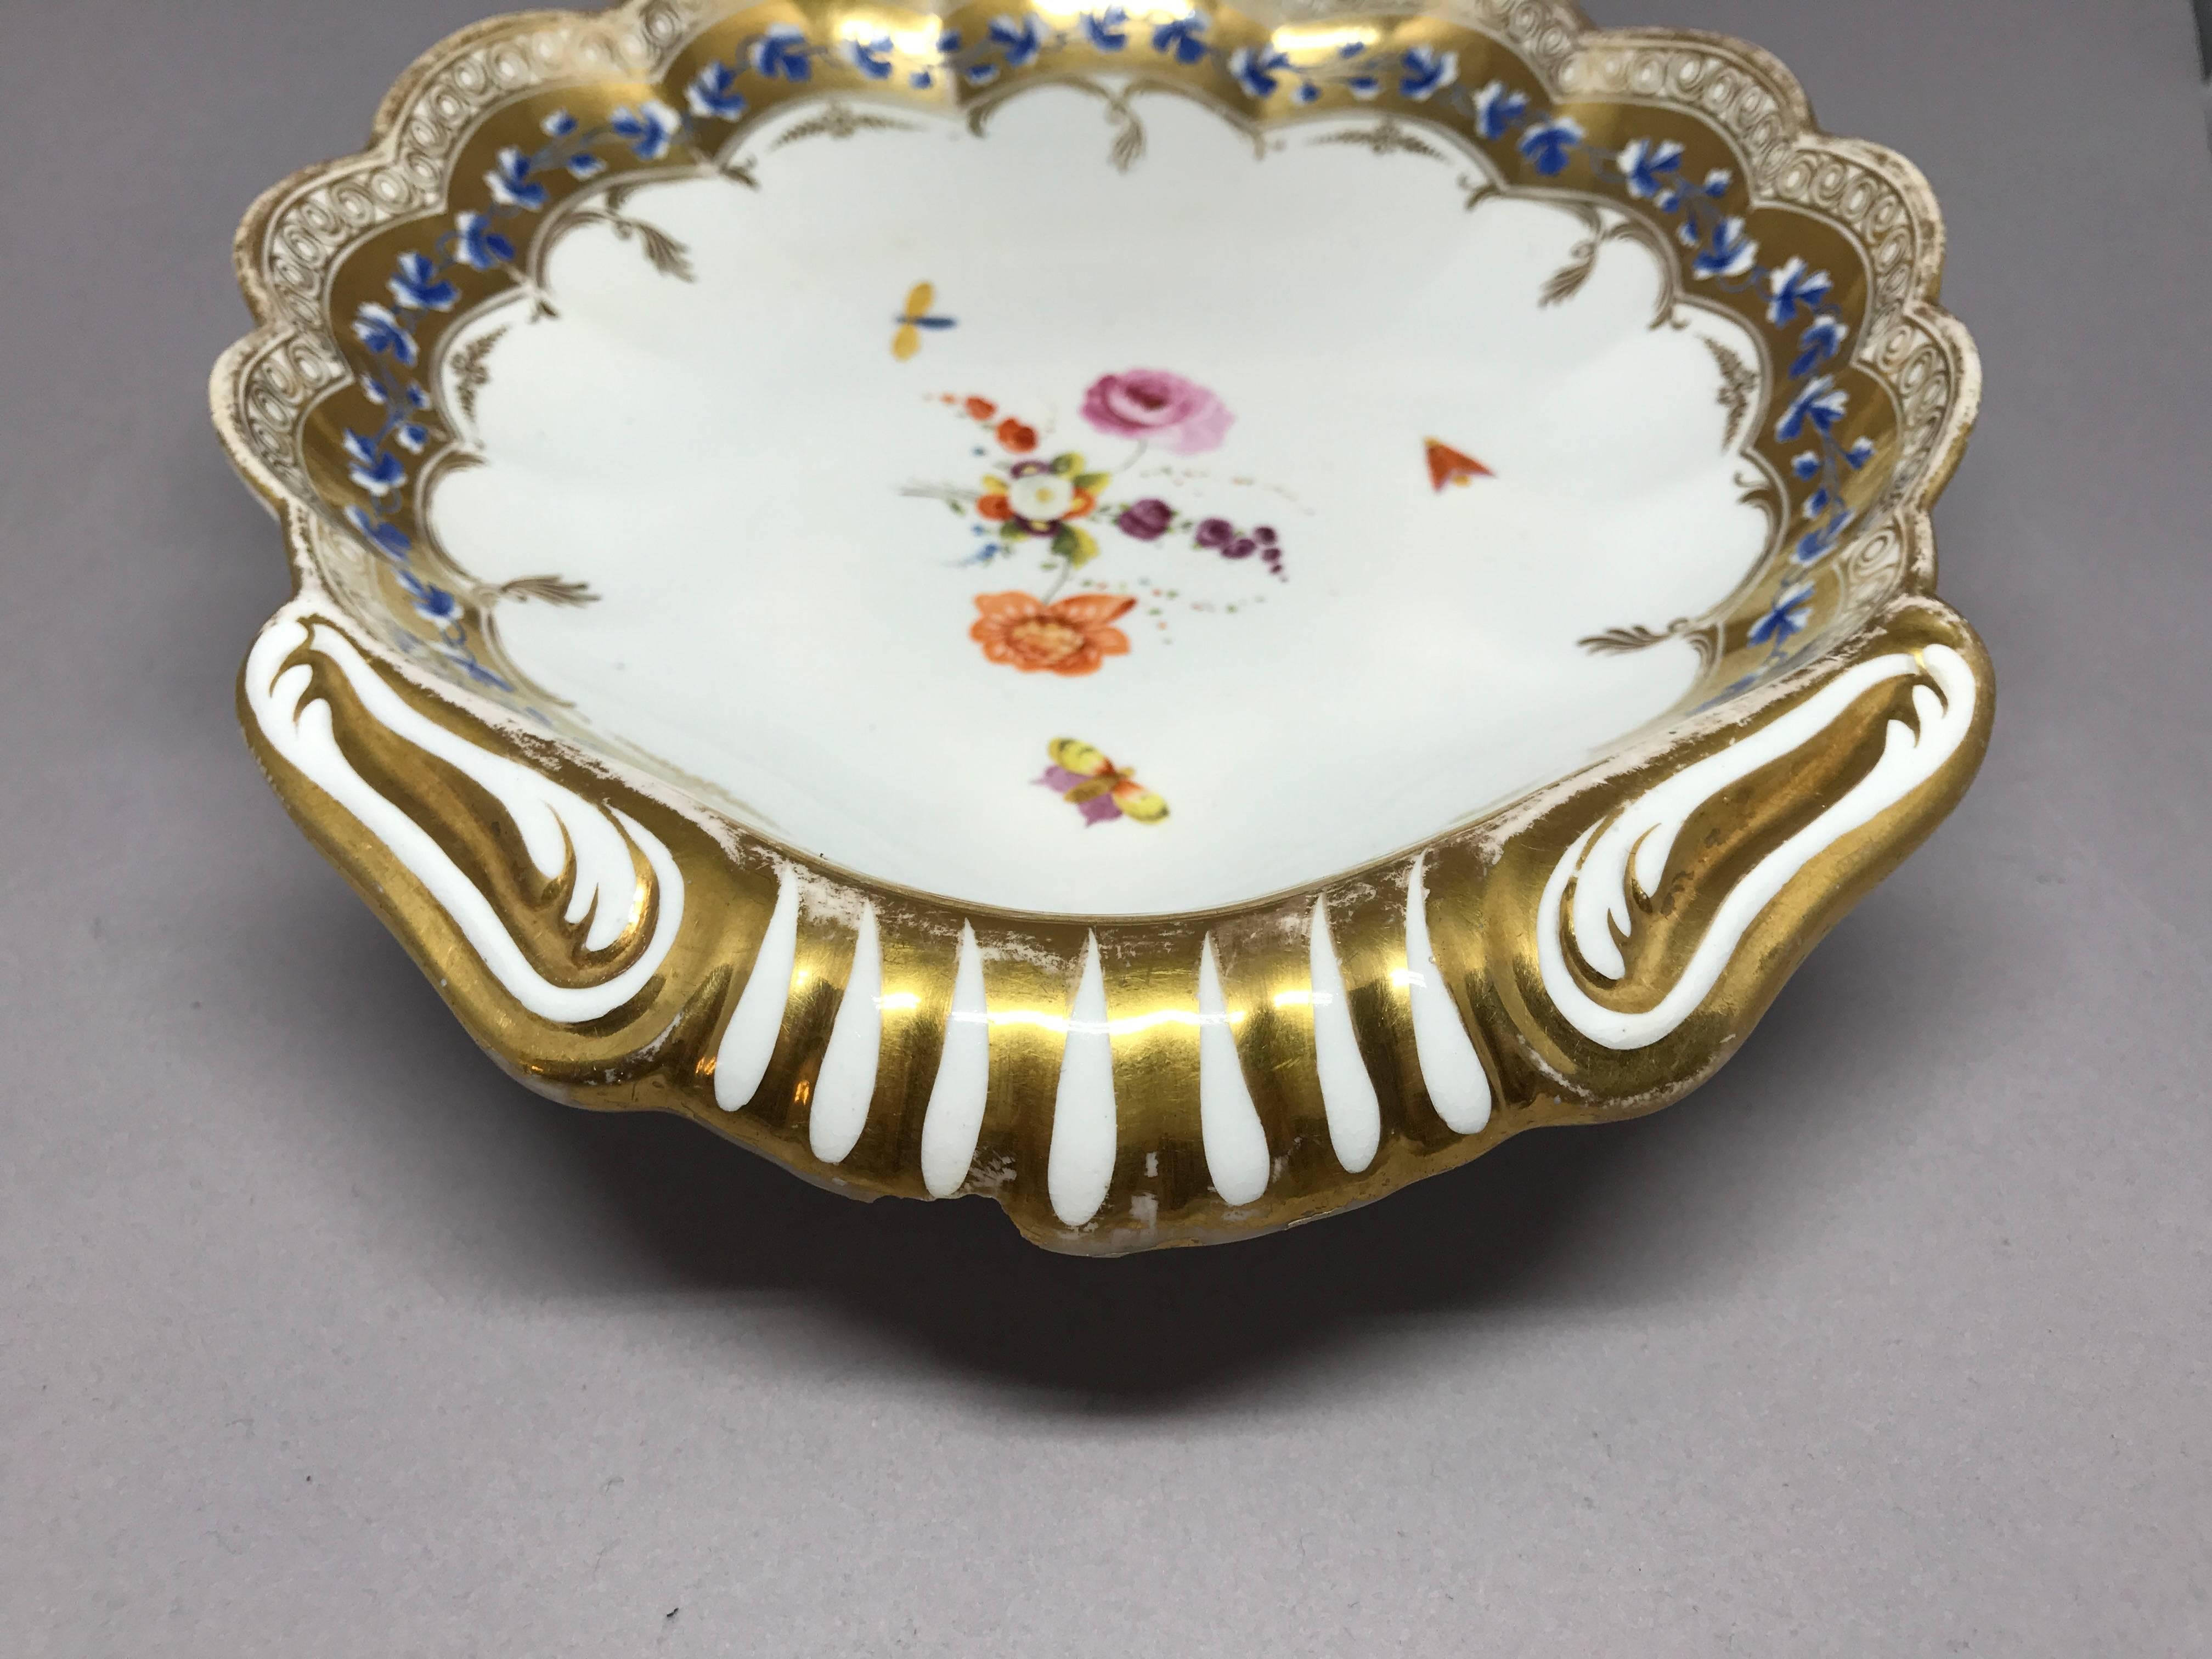 English gilt painted shell form serving dish. Lobed shell shaped sweetmeat dish/plate with gold and blue band centering on small flowers and butterflies. Underglaze blue 